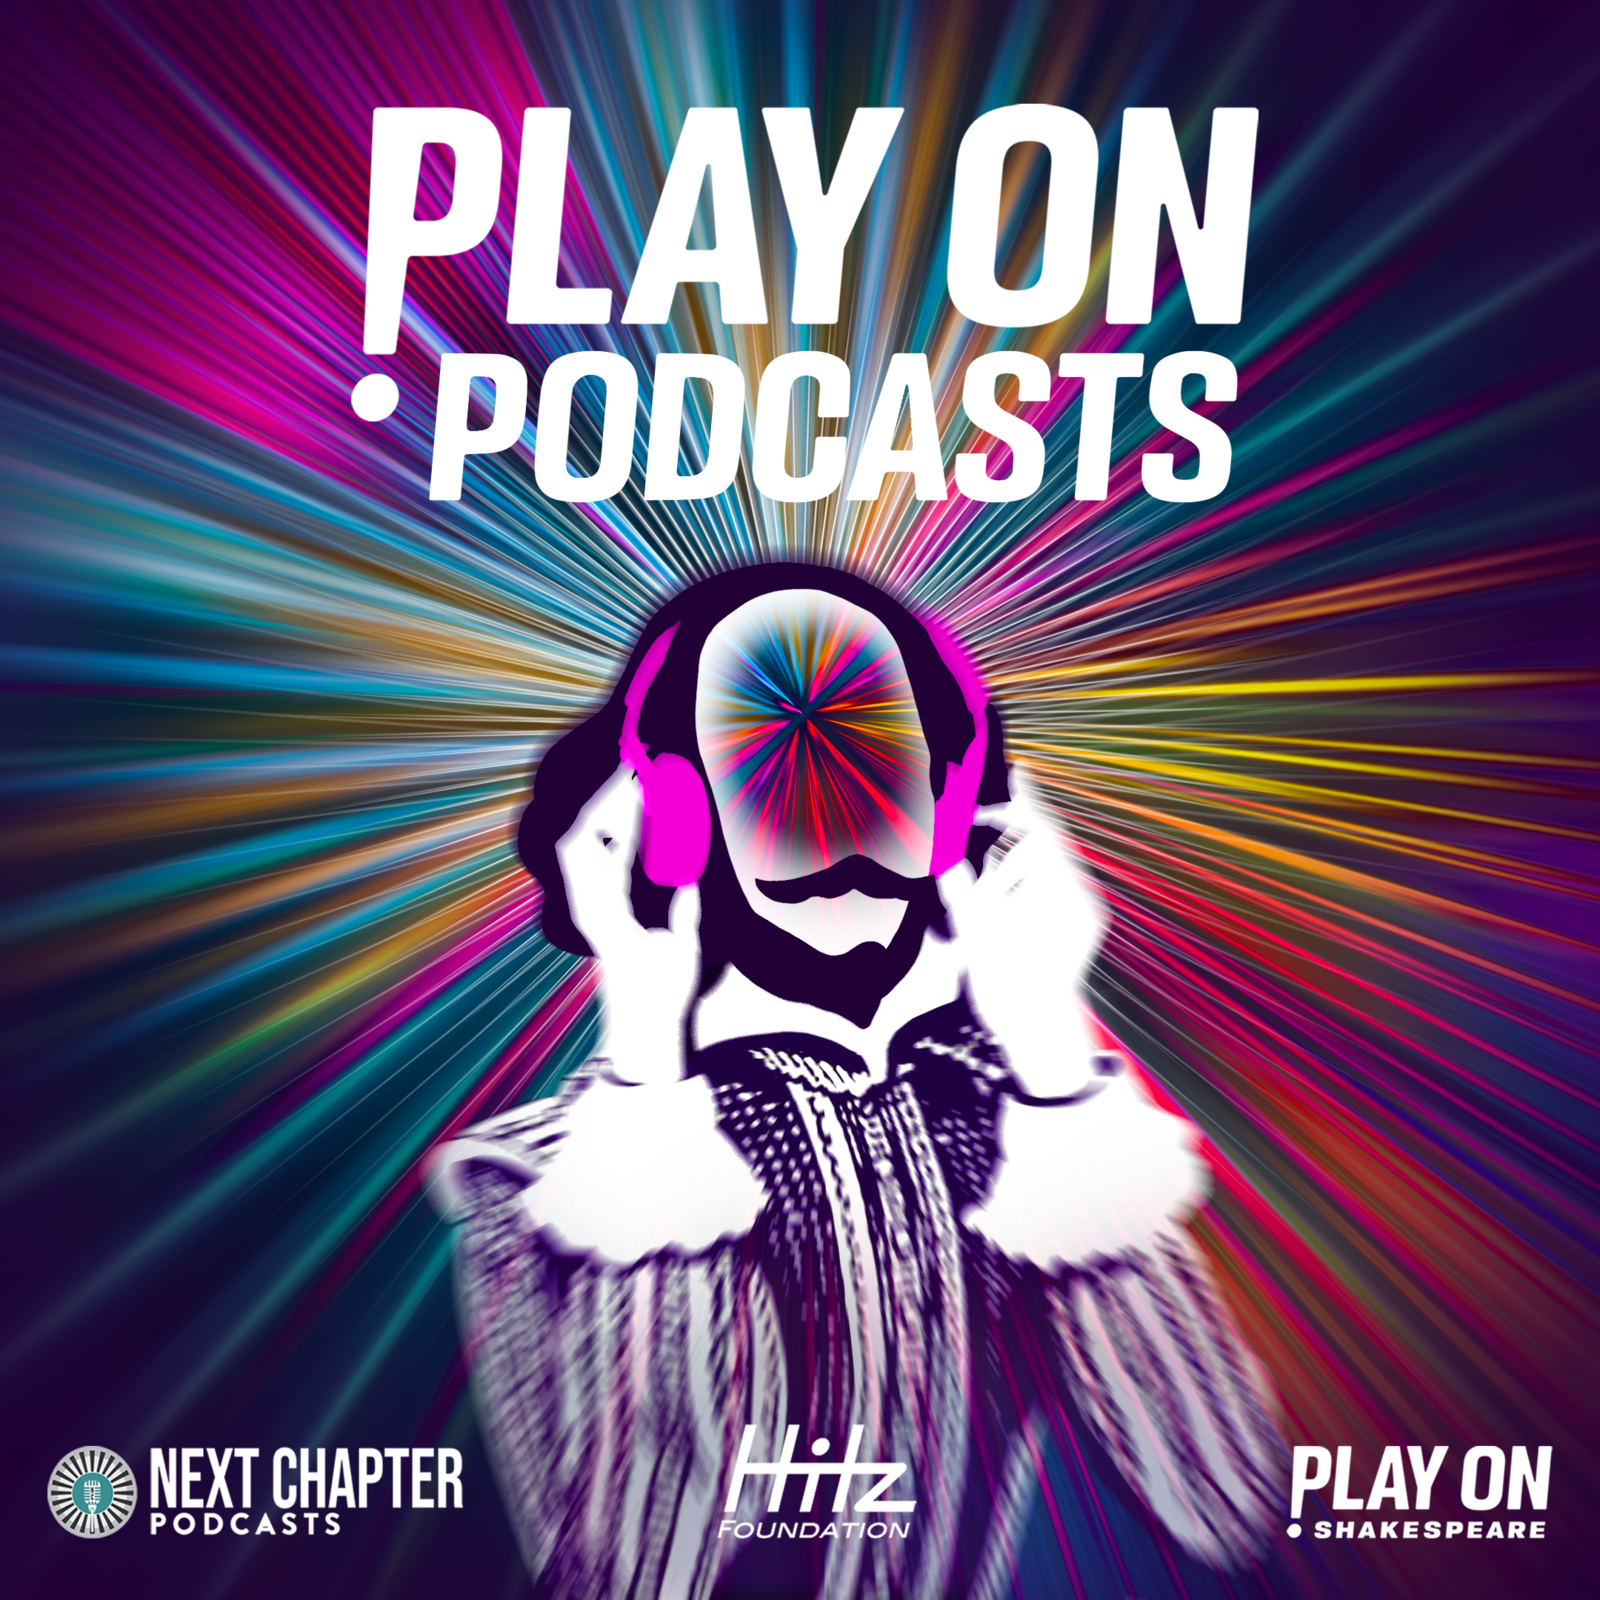 Play On Podcasts:Next Chapter Podcasts